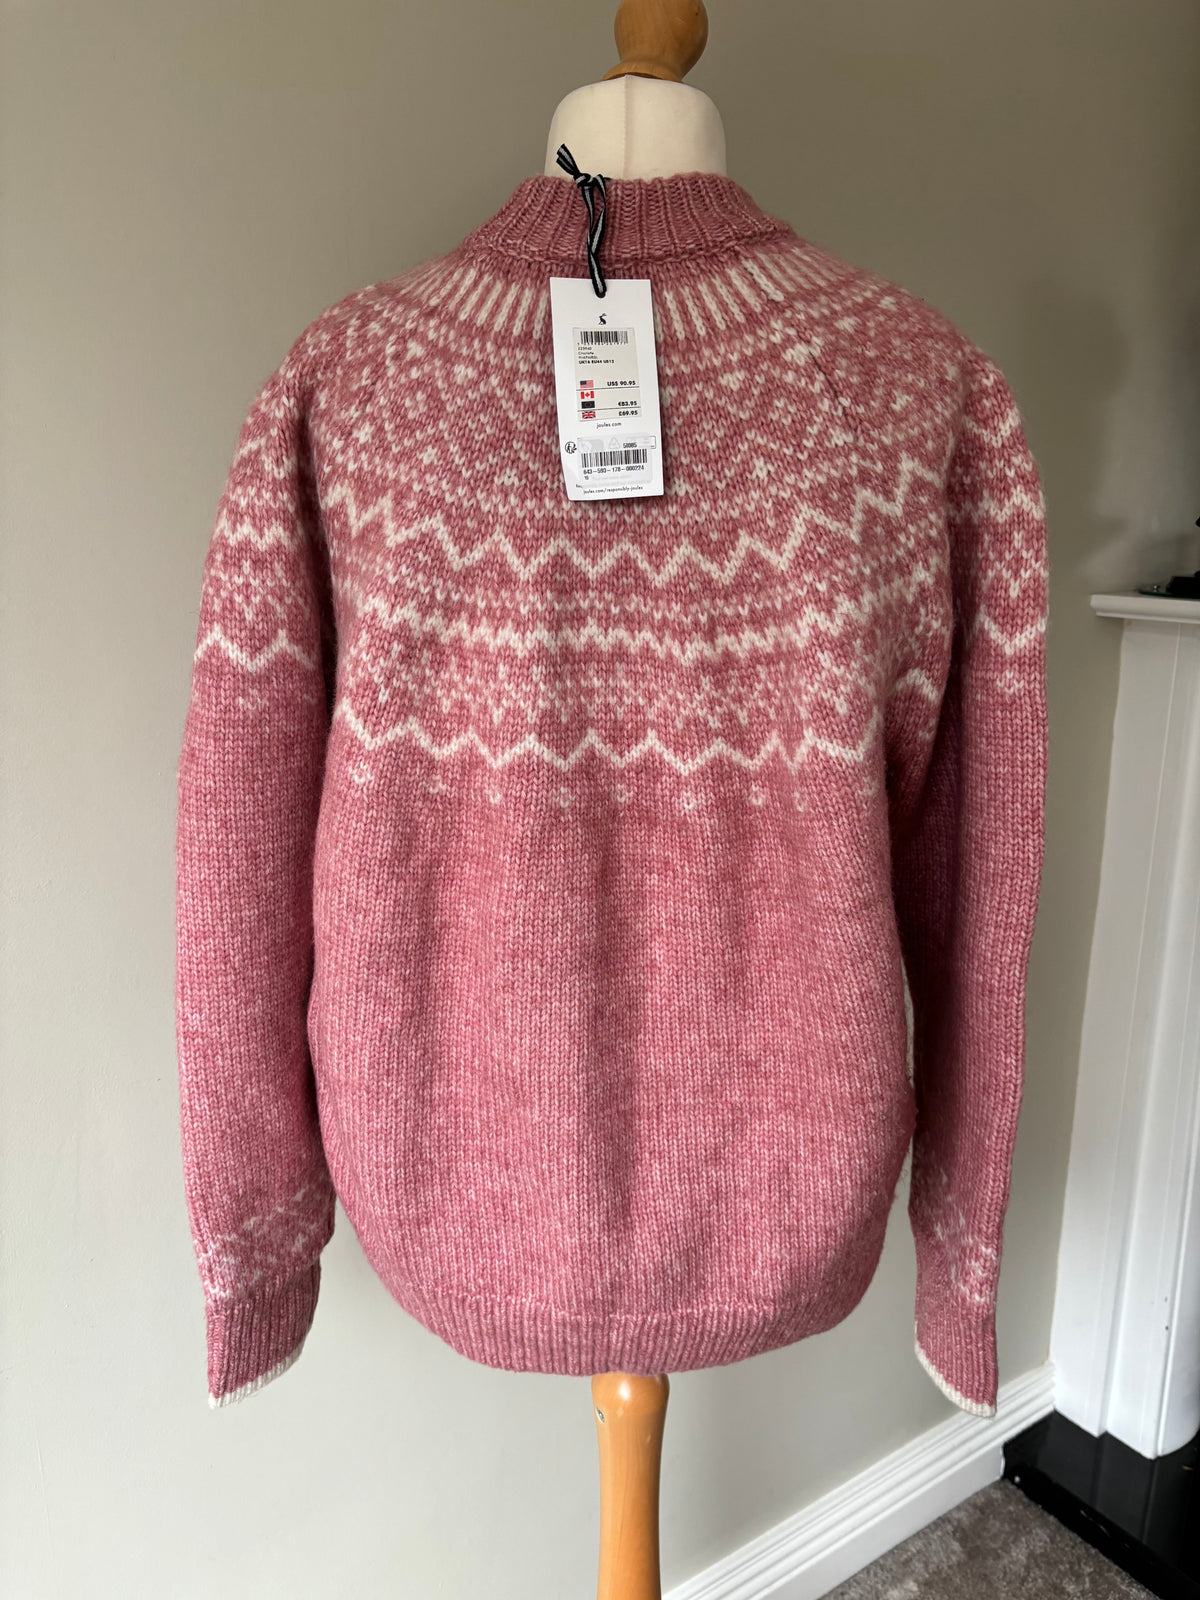 Charlotte Pink Fair Isle Jumper By Joules Size 18